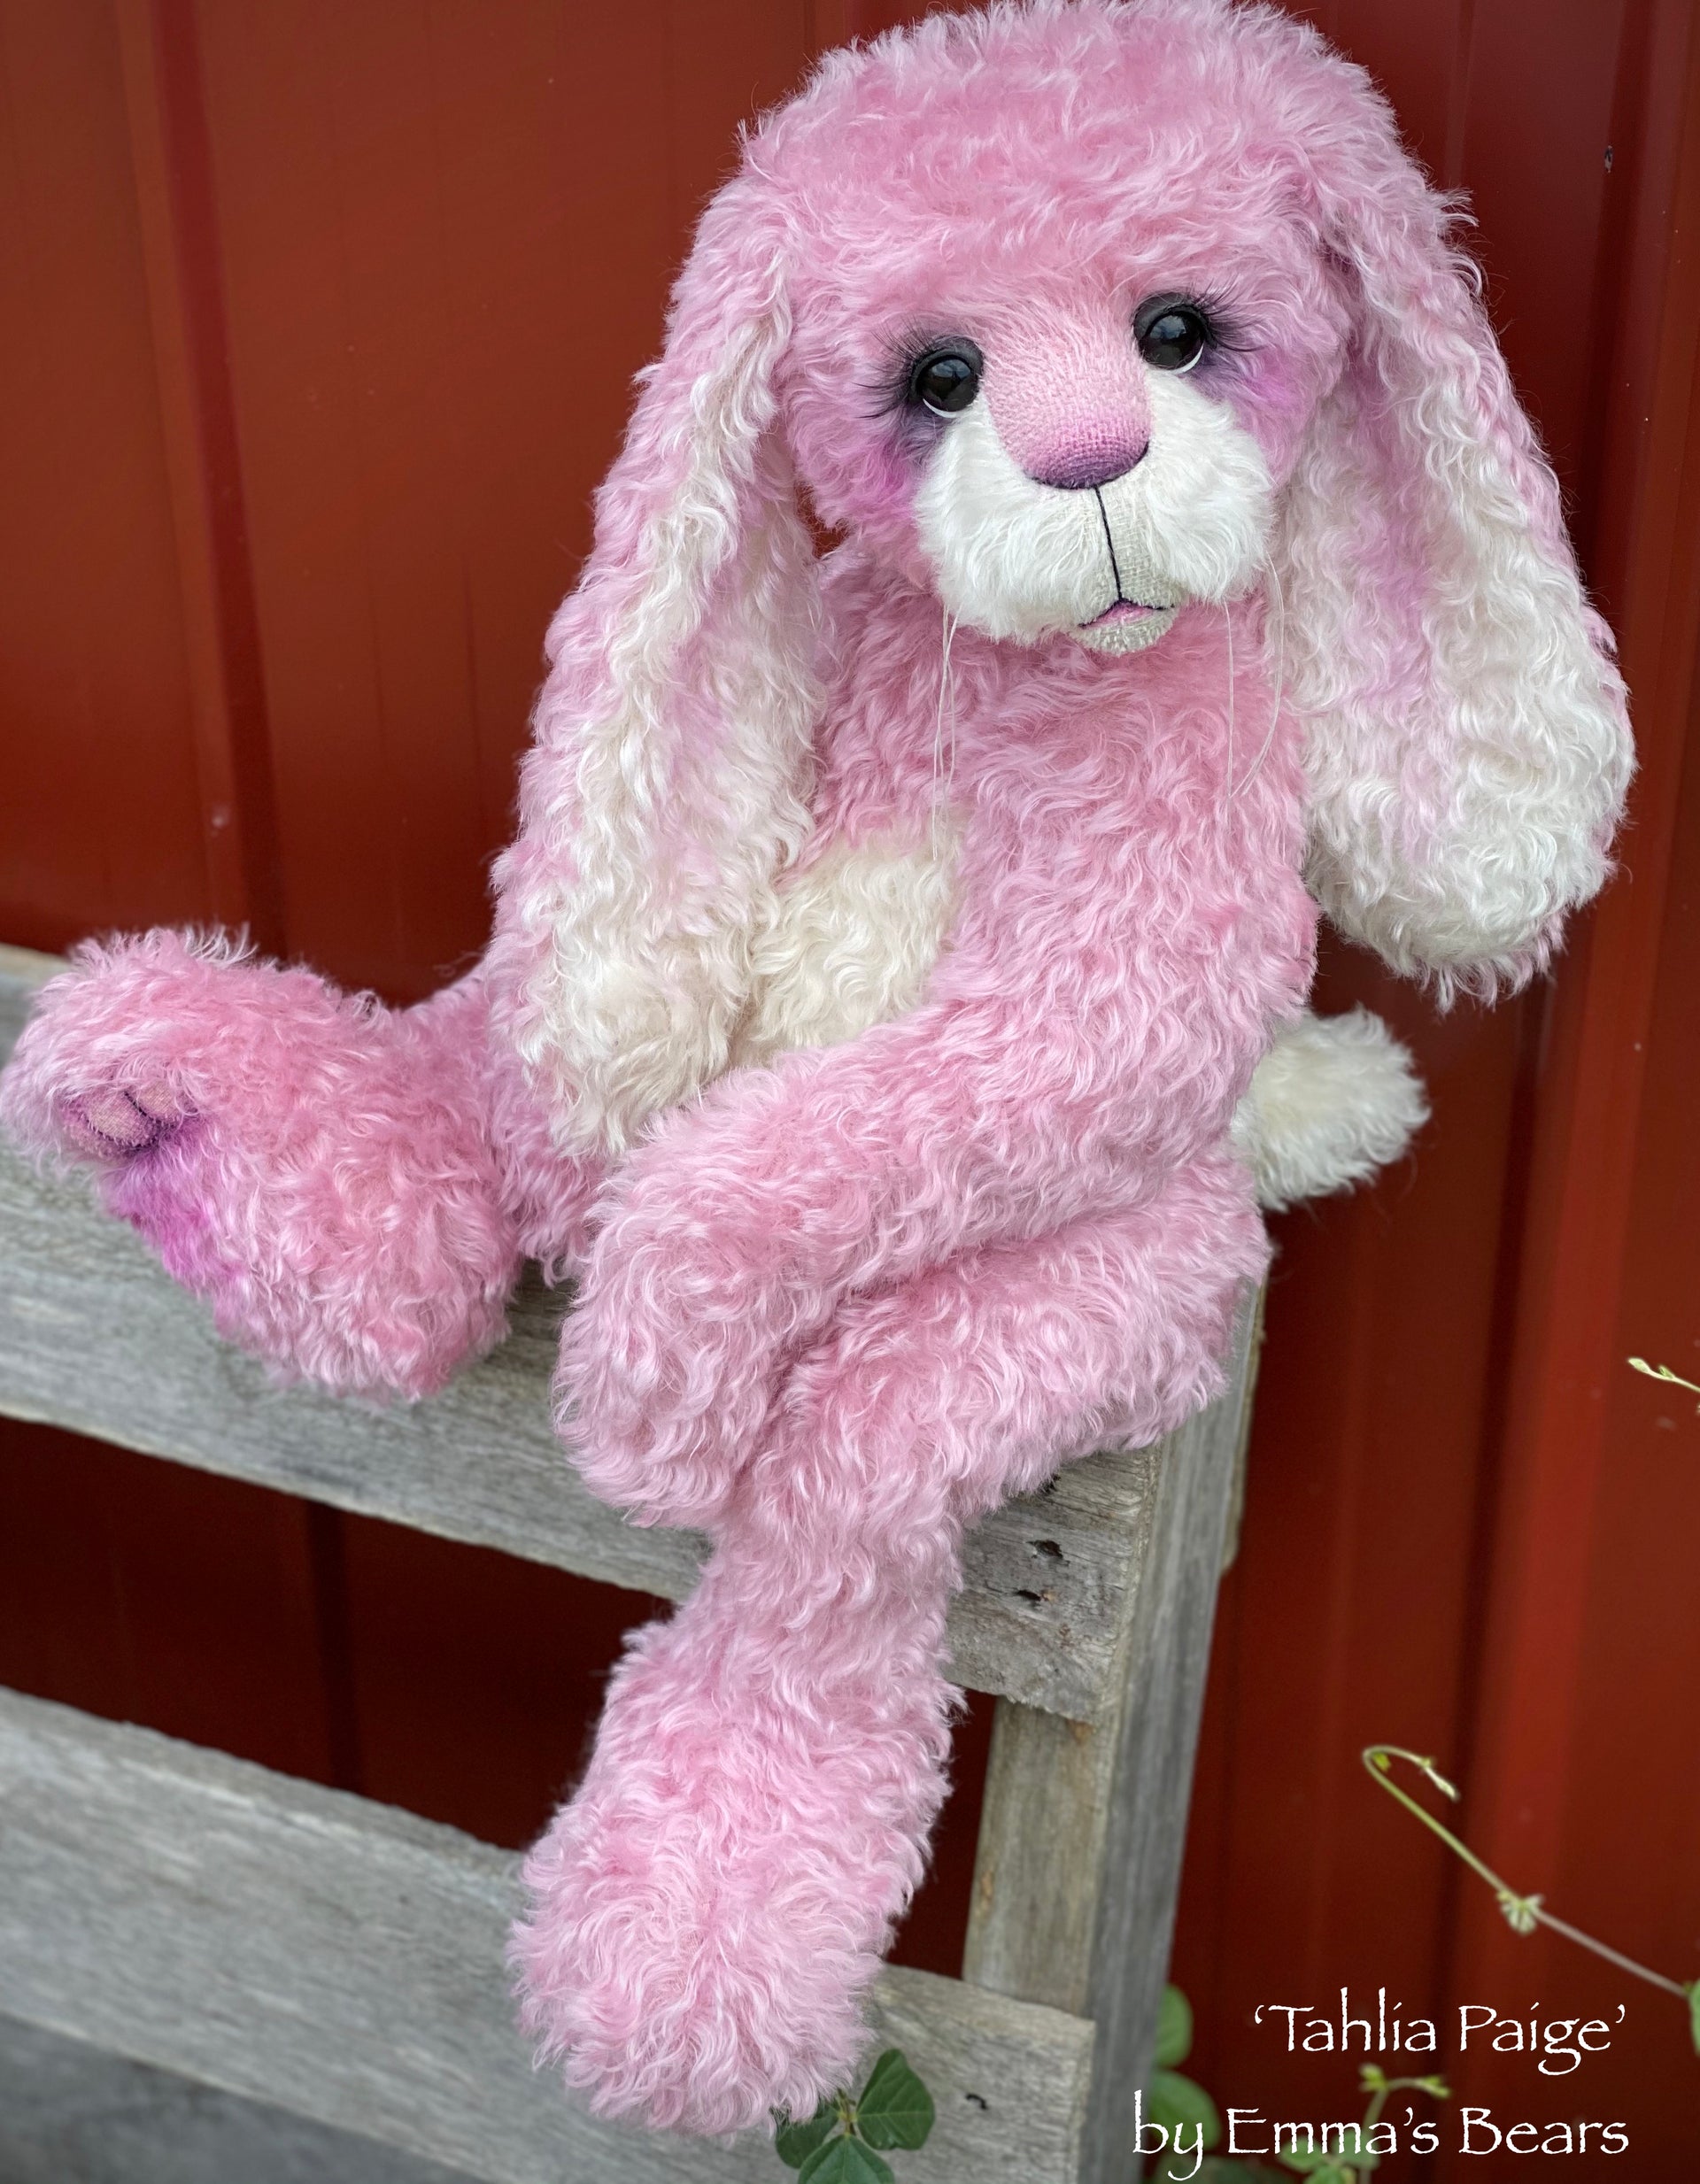 Tahlia Paige - 21" Kid Mohair Toddler Artist BUNNY by Emma's Bears - OOAK